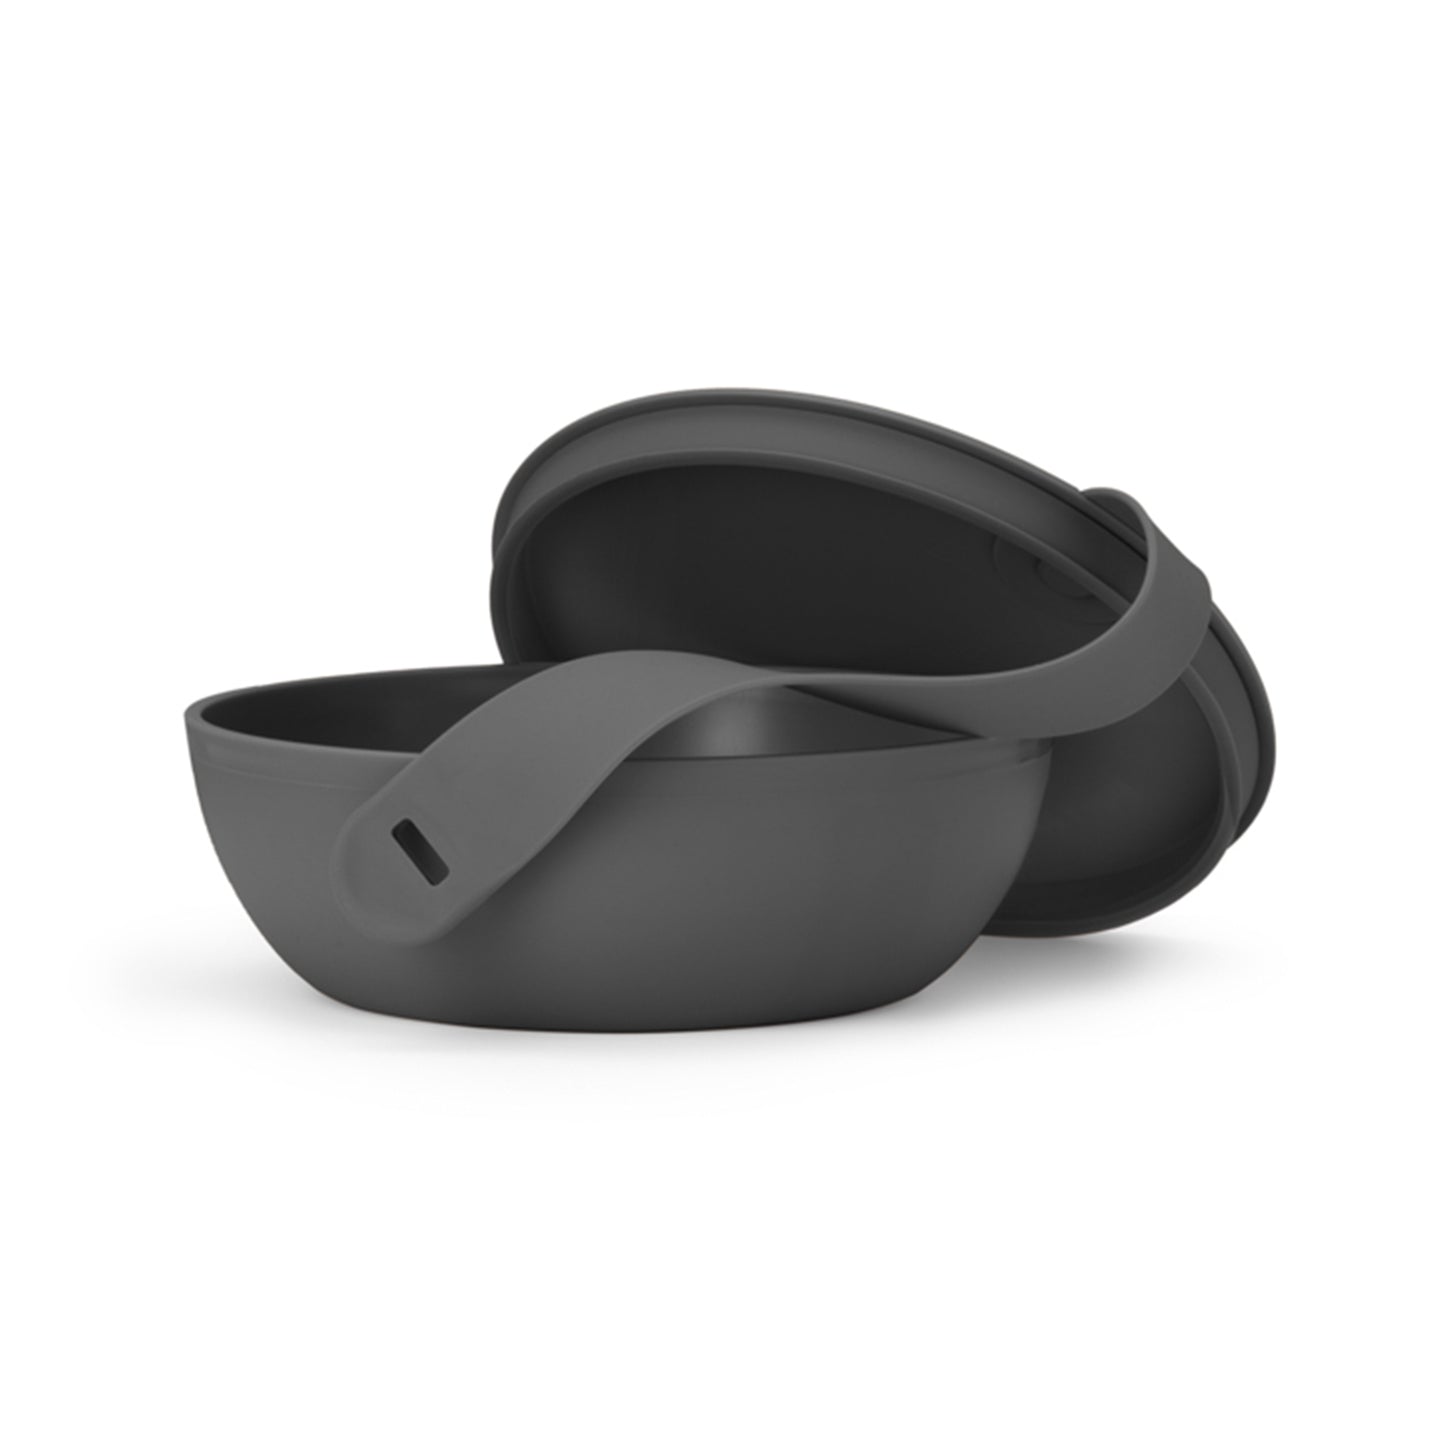 Reusable seal tight lunch bowl